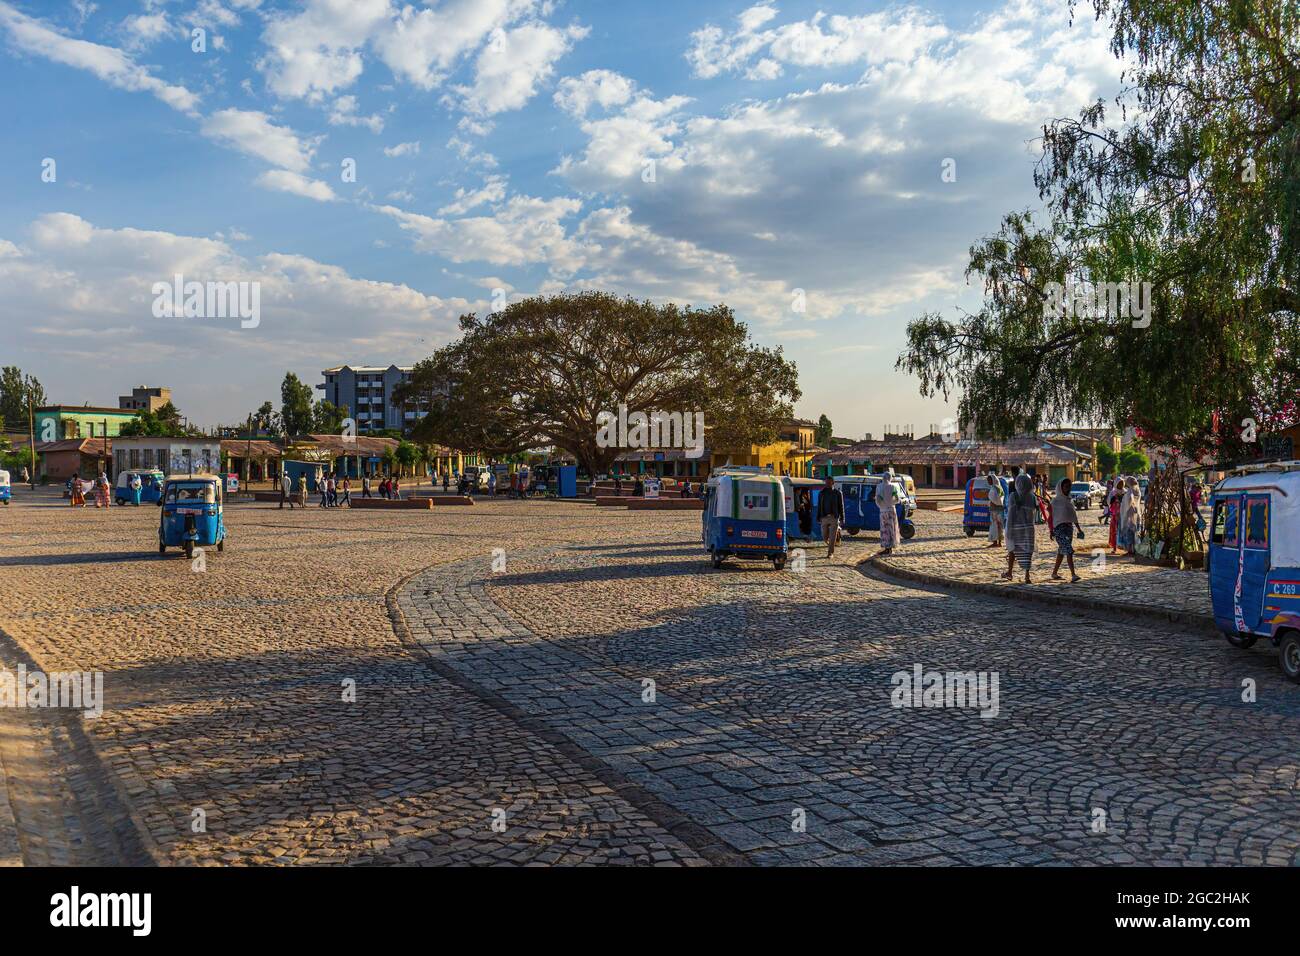 AKSUM, ETHIOPIA - JANUARY 24, 2020: Fig tree at the main square in the center of Aksum in Ethiopia Stock Photo